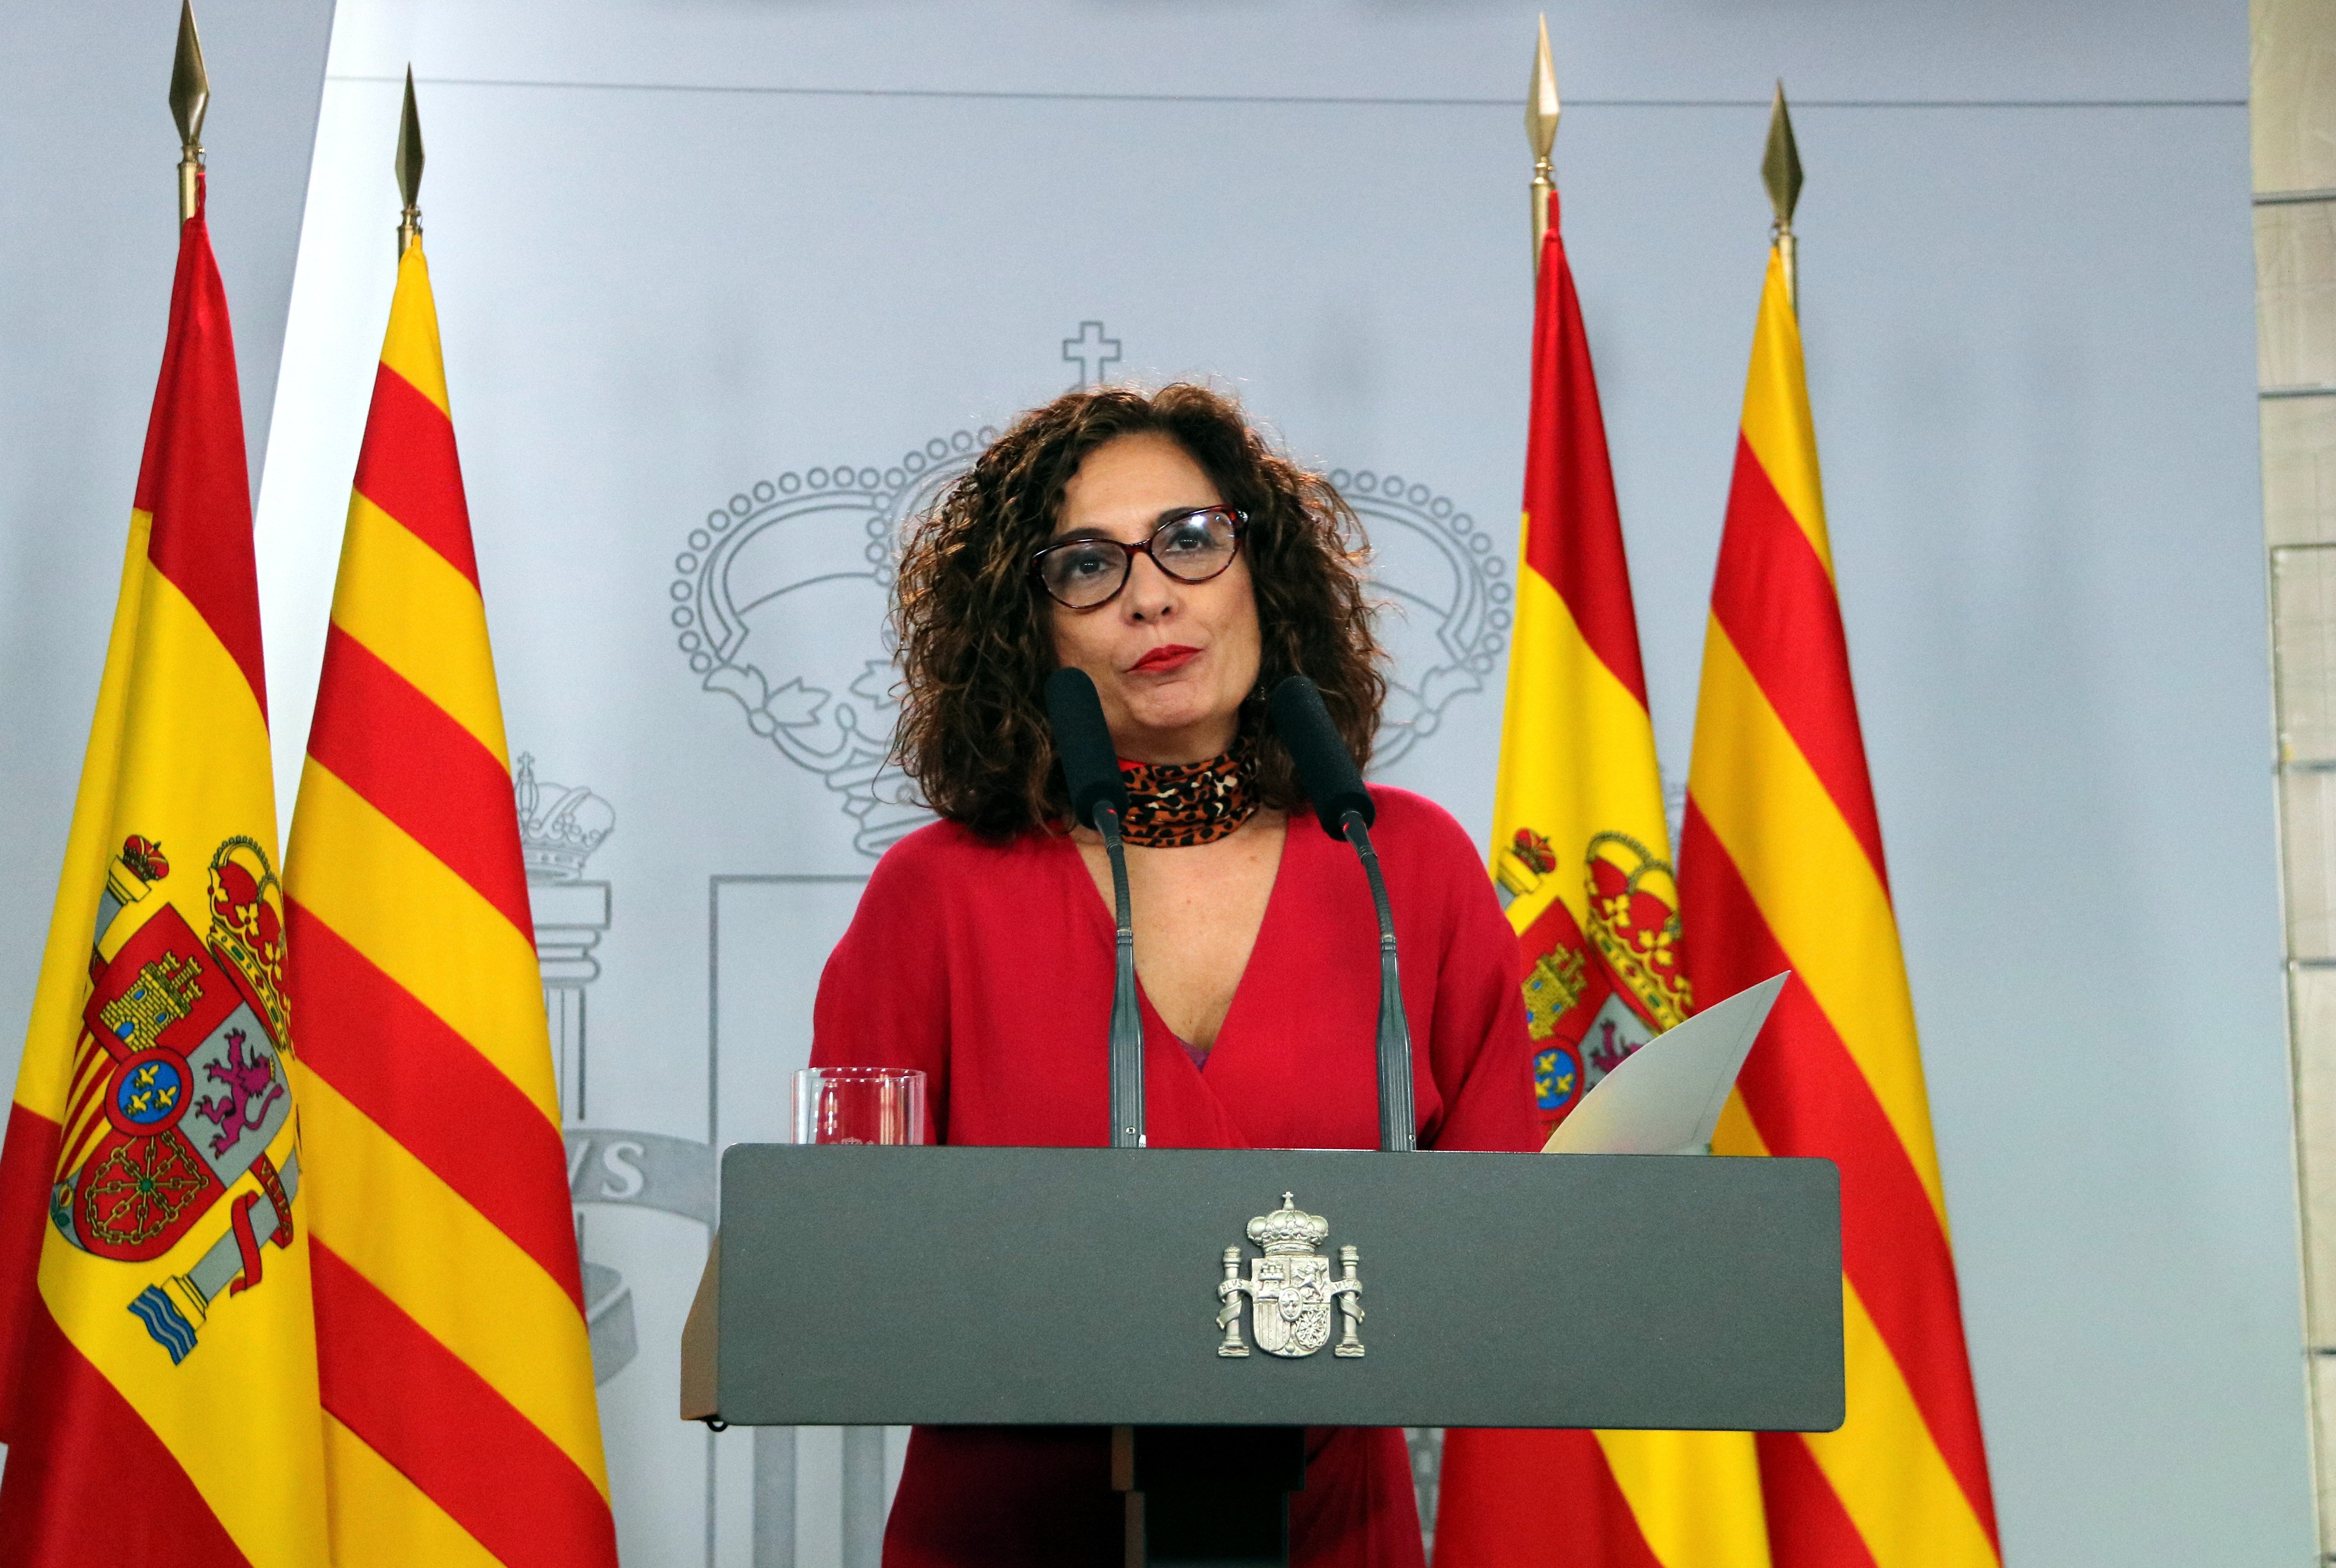 Spanish government rejects self-determination and calls for "imaginative formulas"